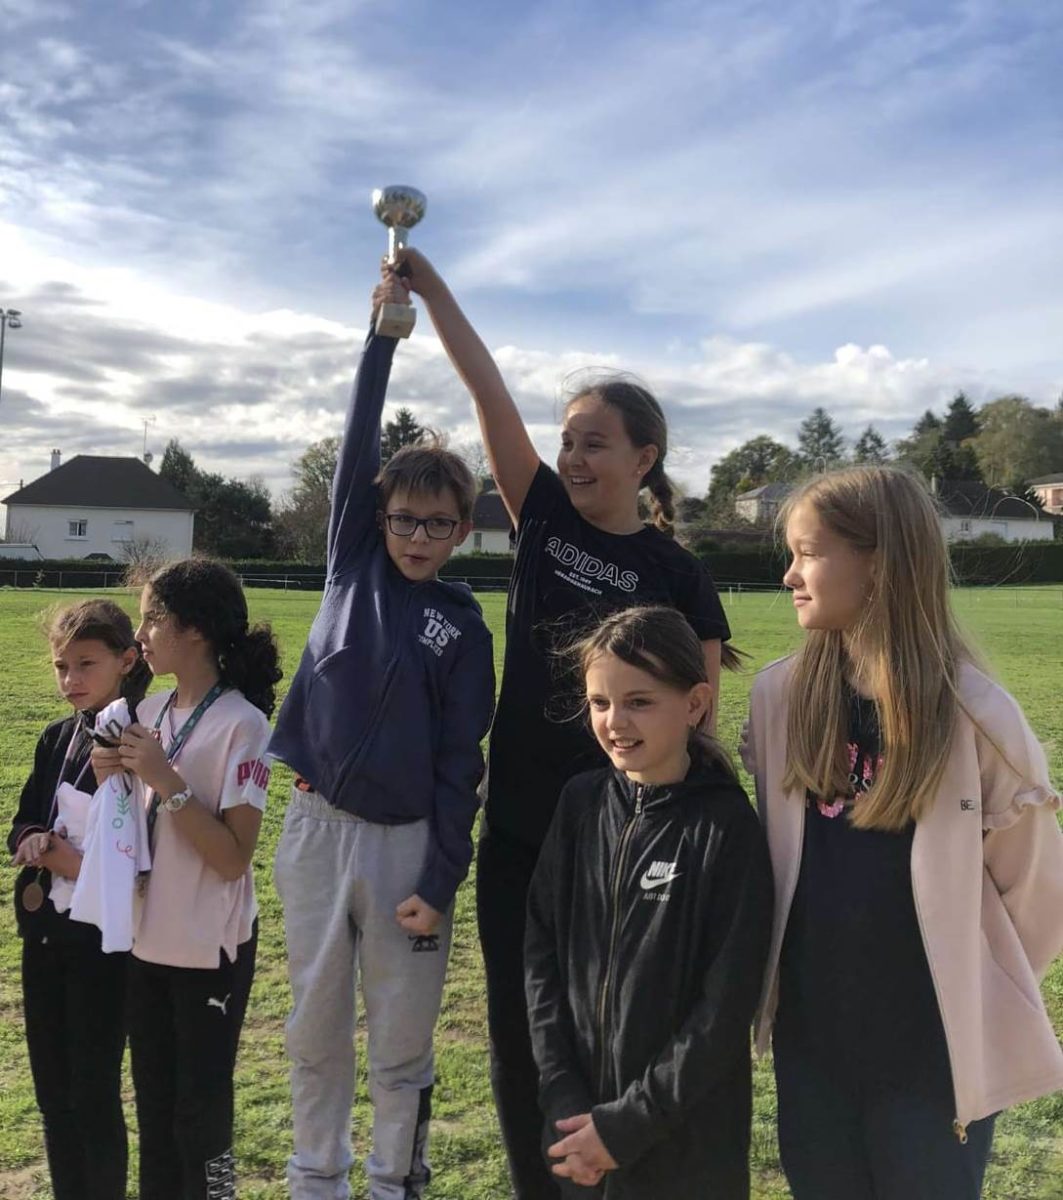 CROSS 2022 CITE SCOLAIRE R.LOEWY